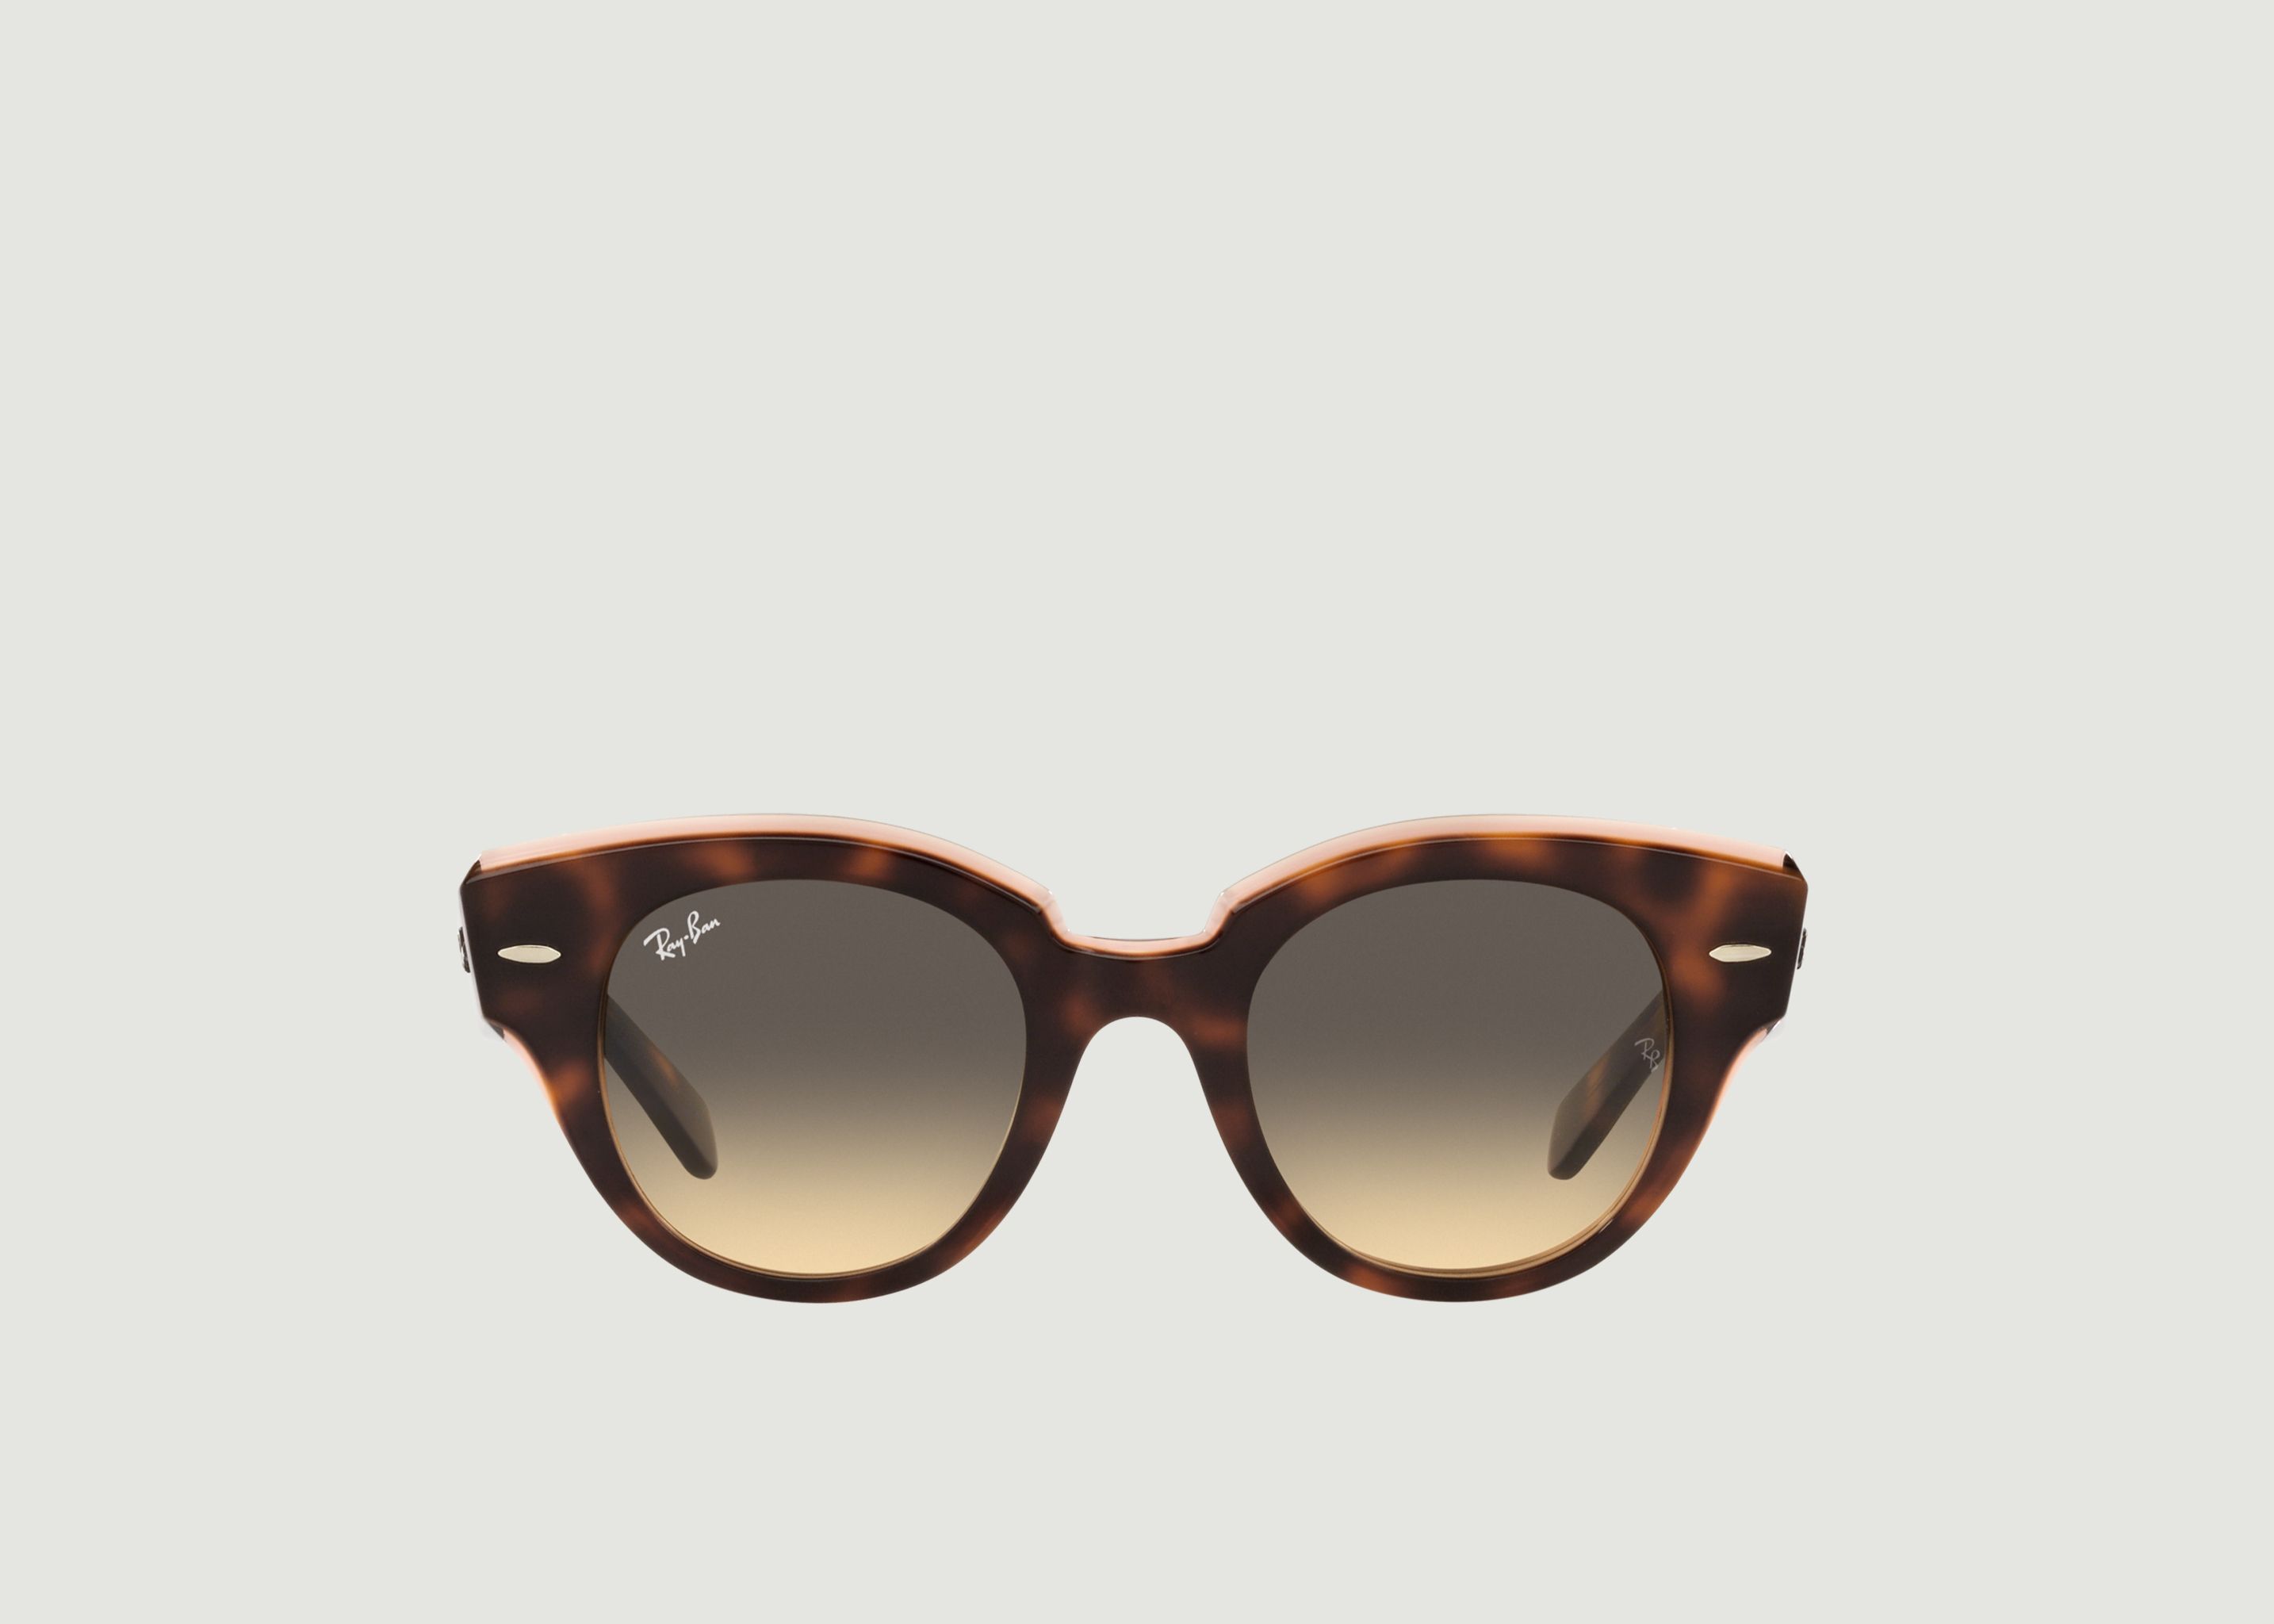 Roundabout-Sonnenbrille - Ray-Ban